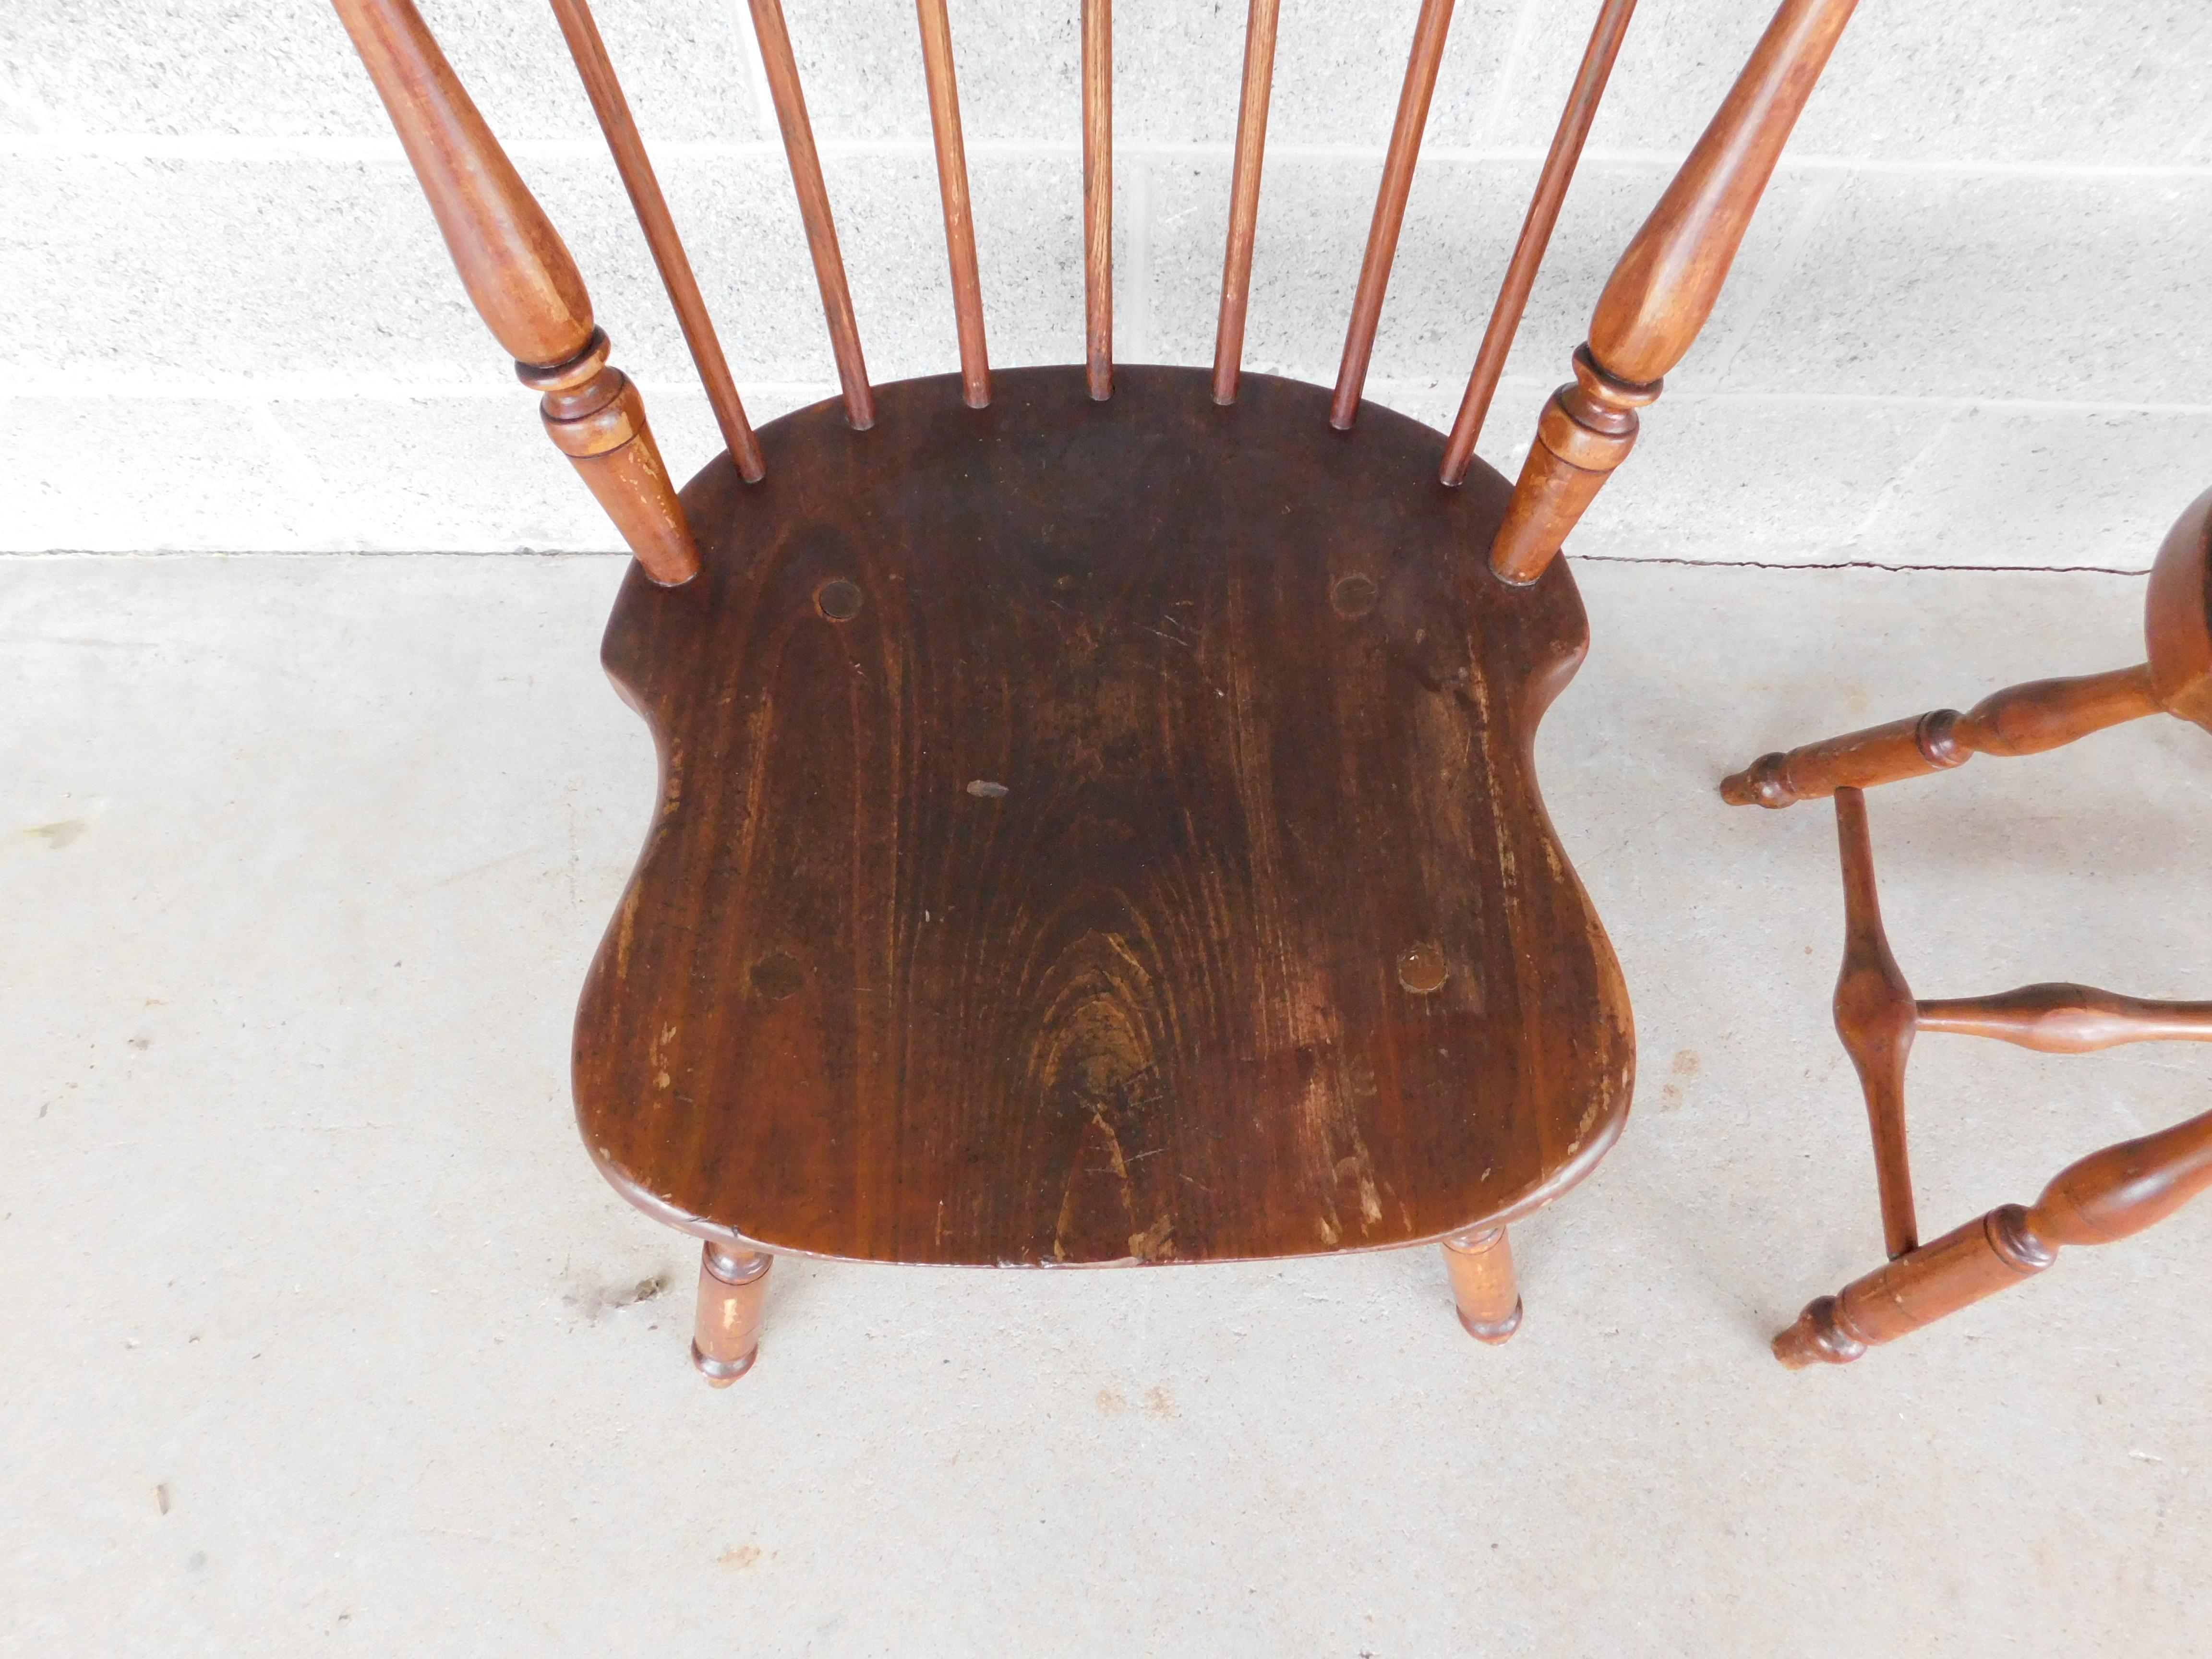 Antique Windsor Fan Back Side Chairs - Set of 5

Hand Made, Turned Legs Through the seat, shaped seat bottom, Ash and or Chestnut Woods used. Circa later 19th Century

Good Sturdy Condition, Original Finish, Antique original Patina

Back Height